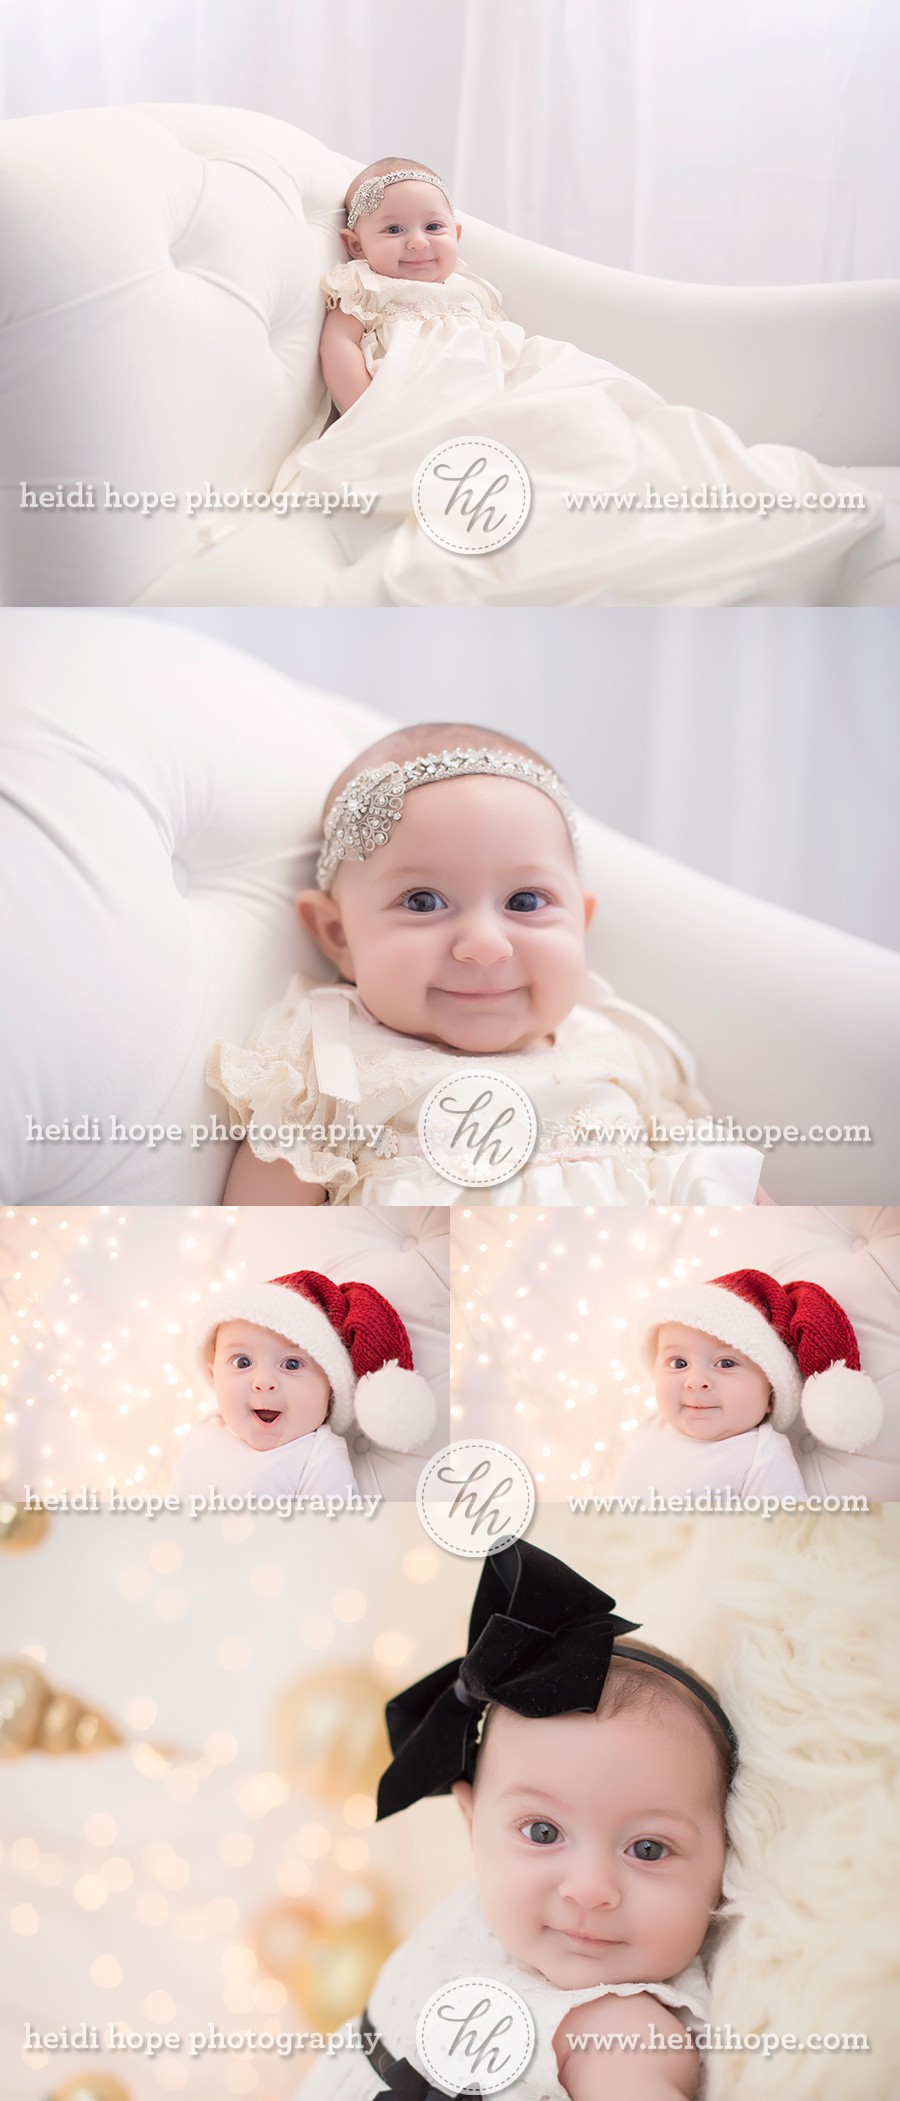 3 month old baby girl christmas portraits and christening gown